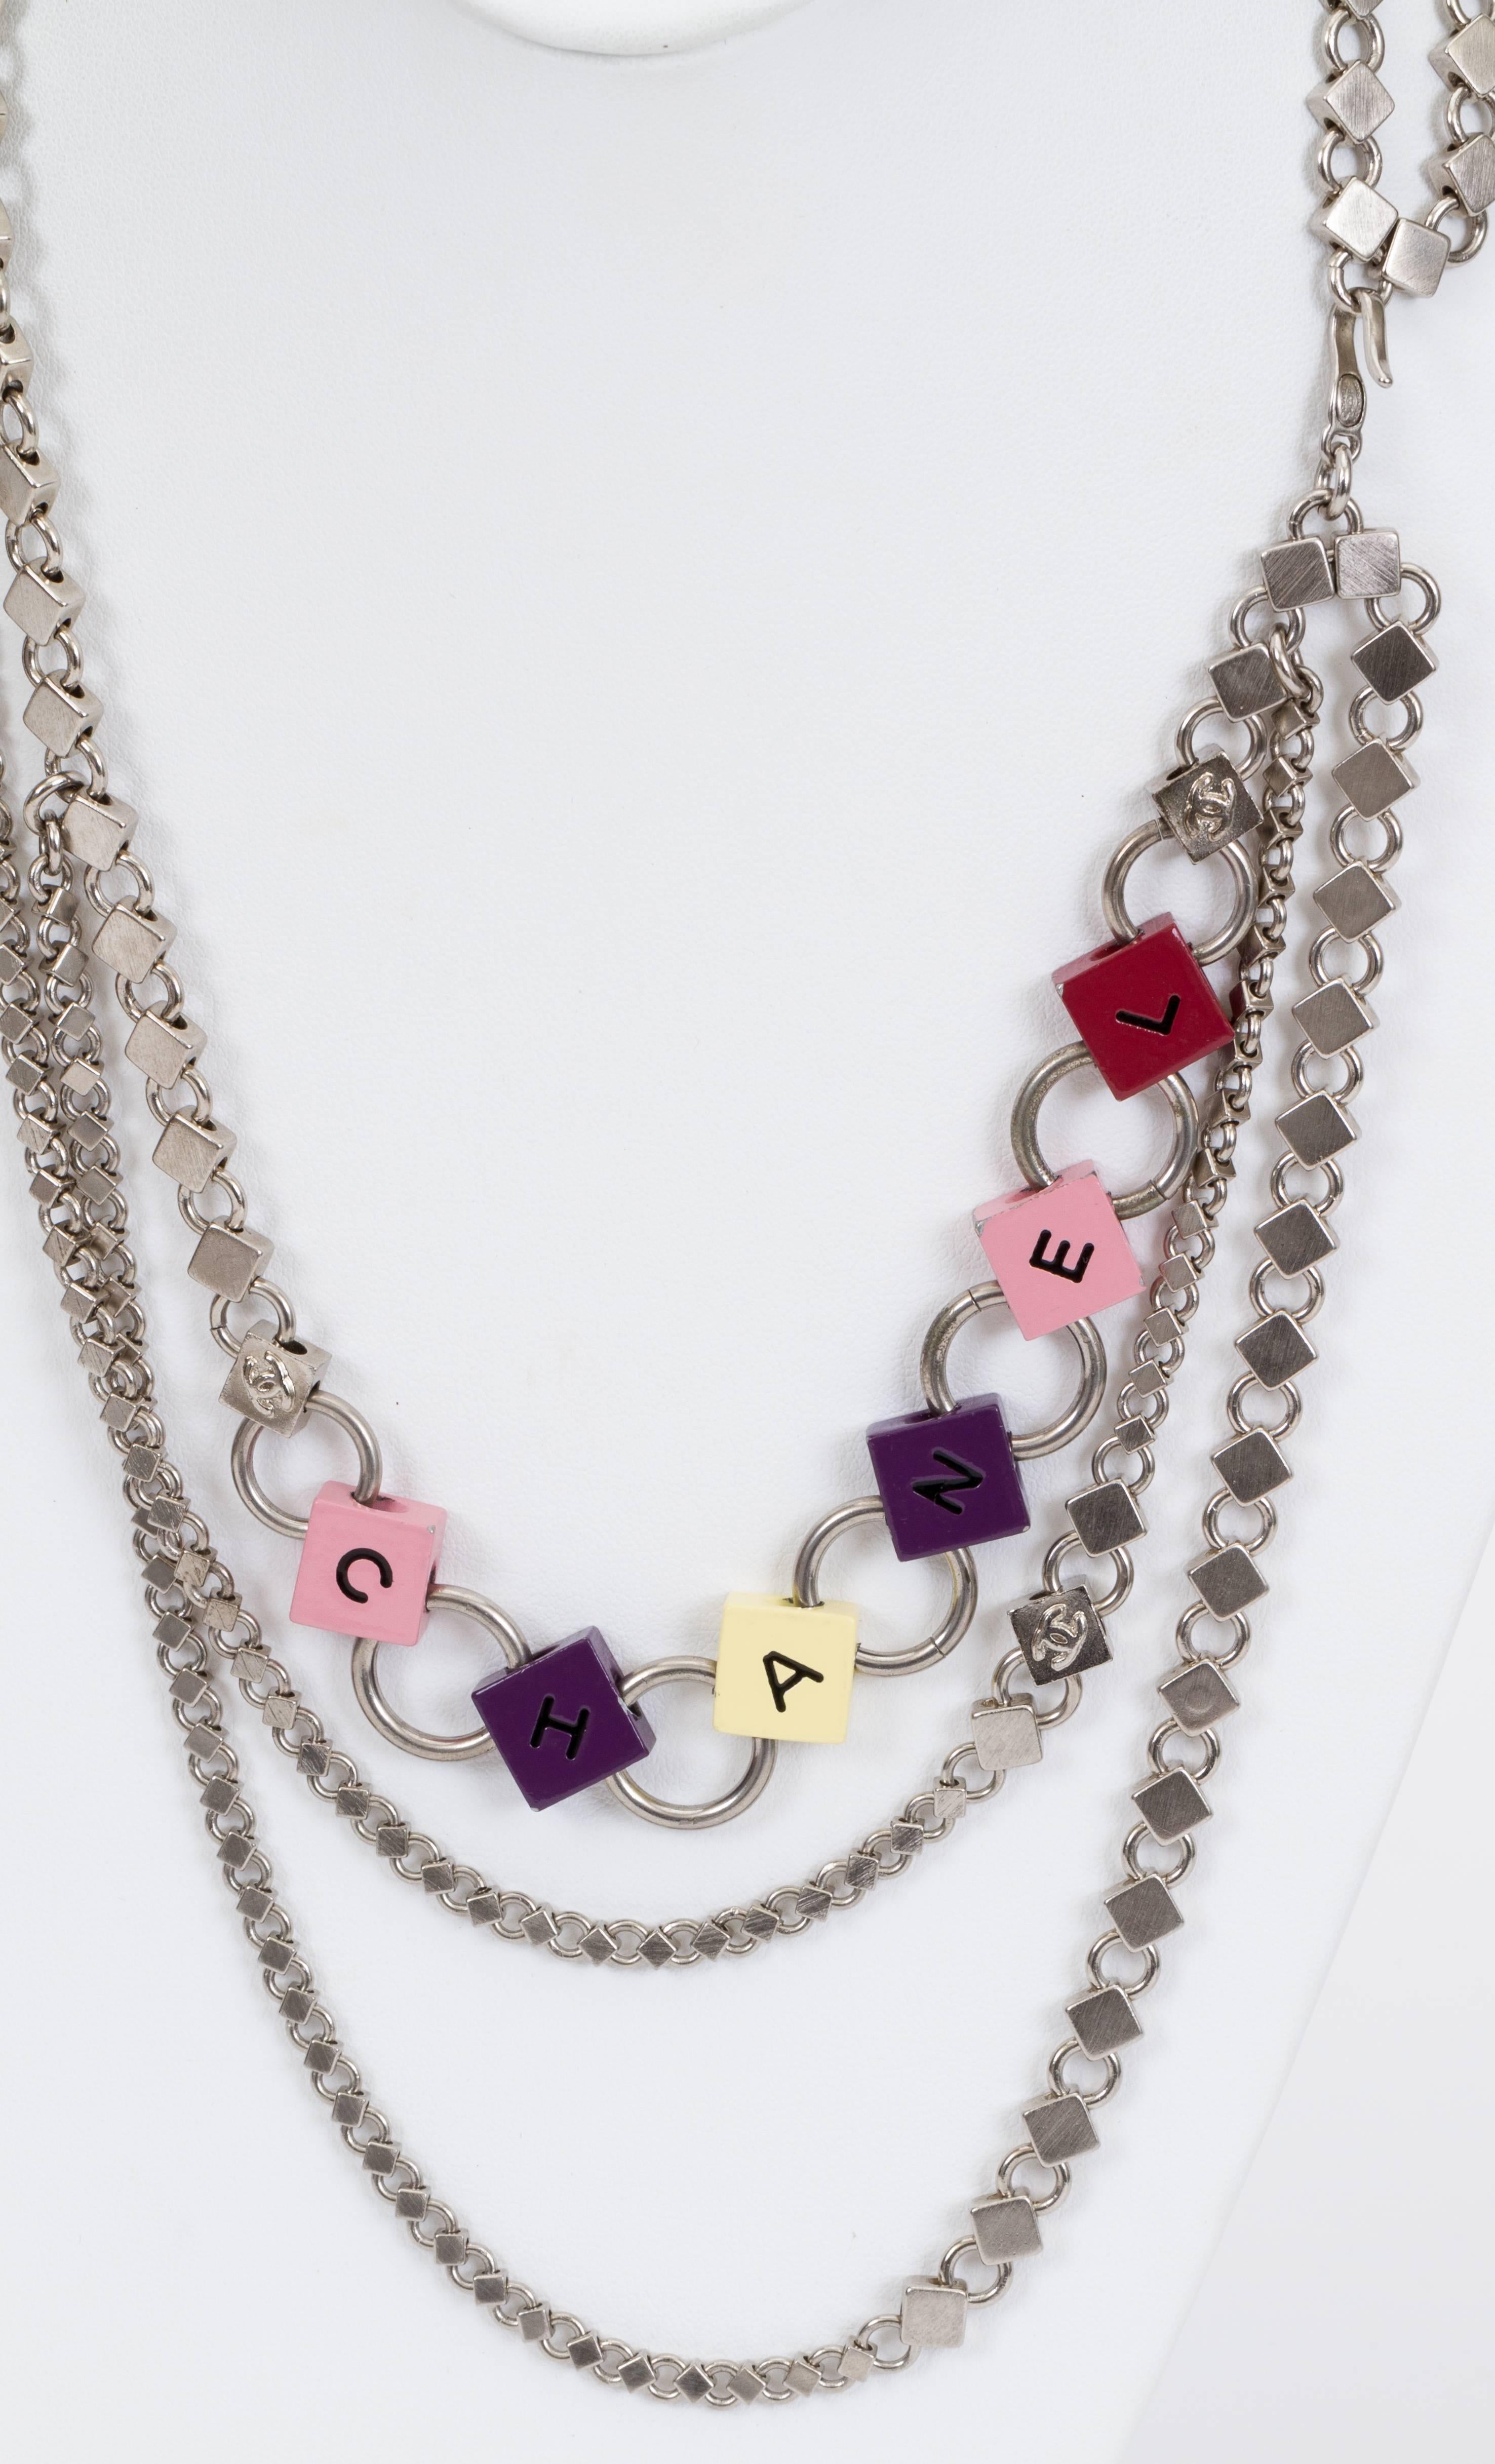 Chanel triple belt /necklace in silver tone brushed metal and multicolor letters. Collection spring 04. Comes with original box.